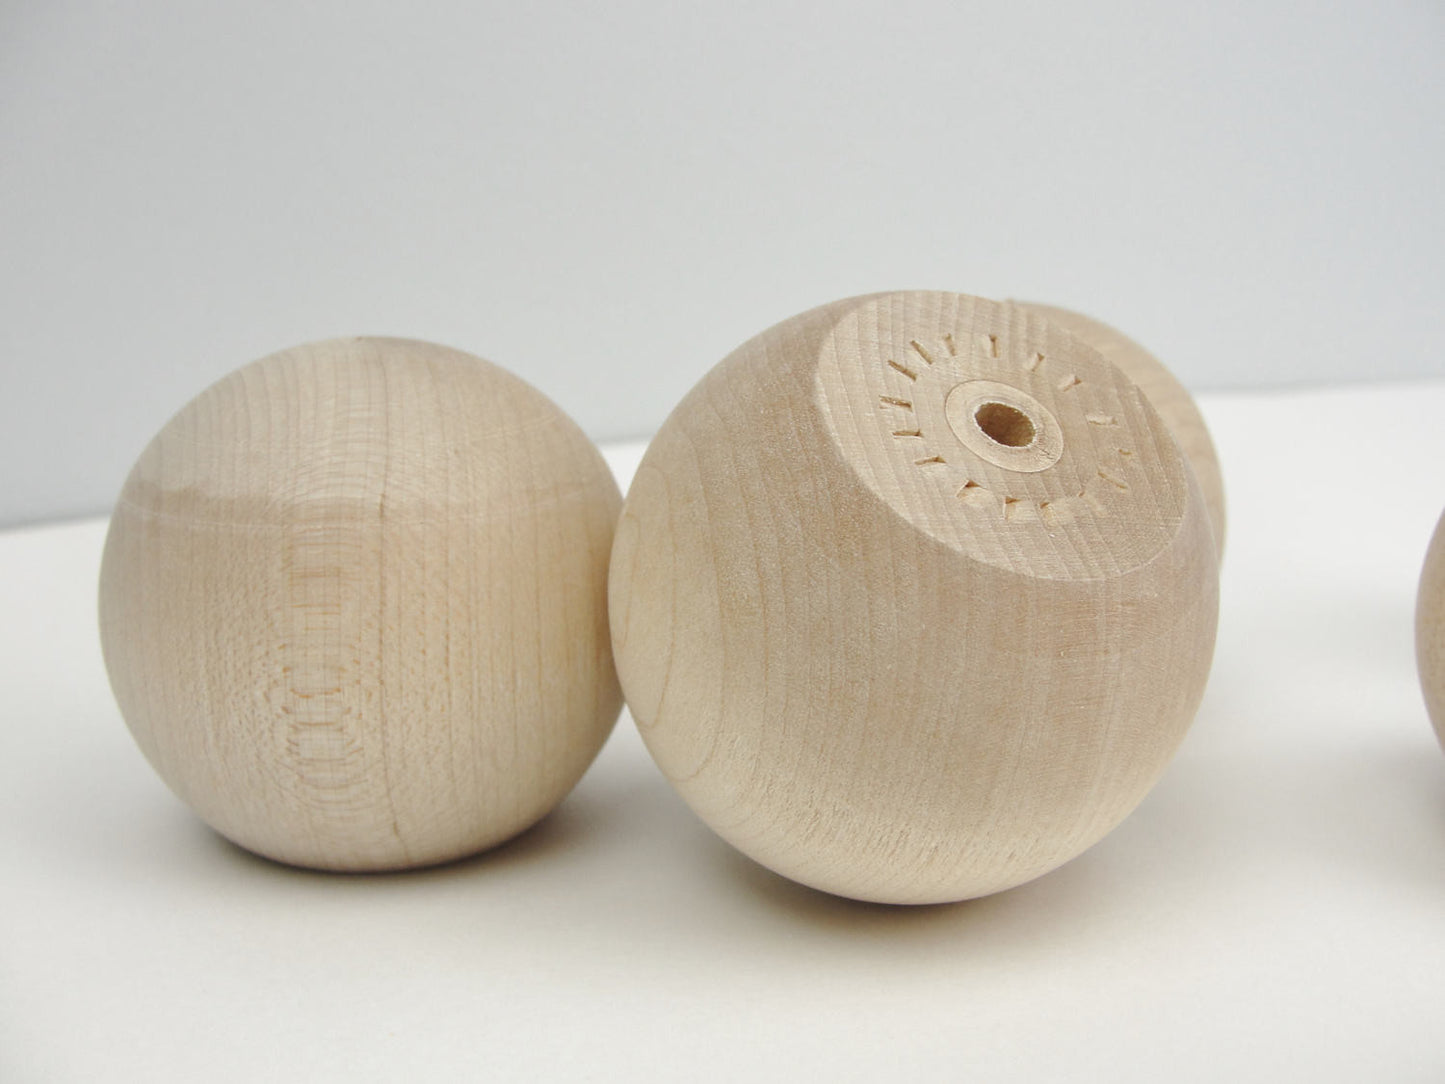 Wooden ball knob 2" (2 inch ball knob) solid wood set of 6 - Wood parts - Craft Supply House